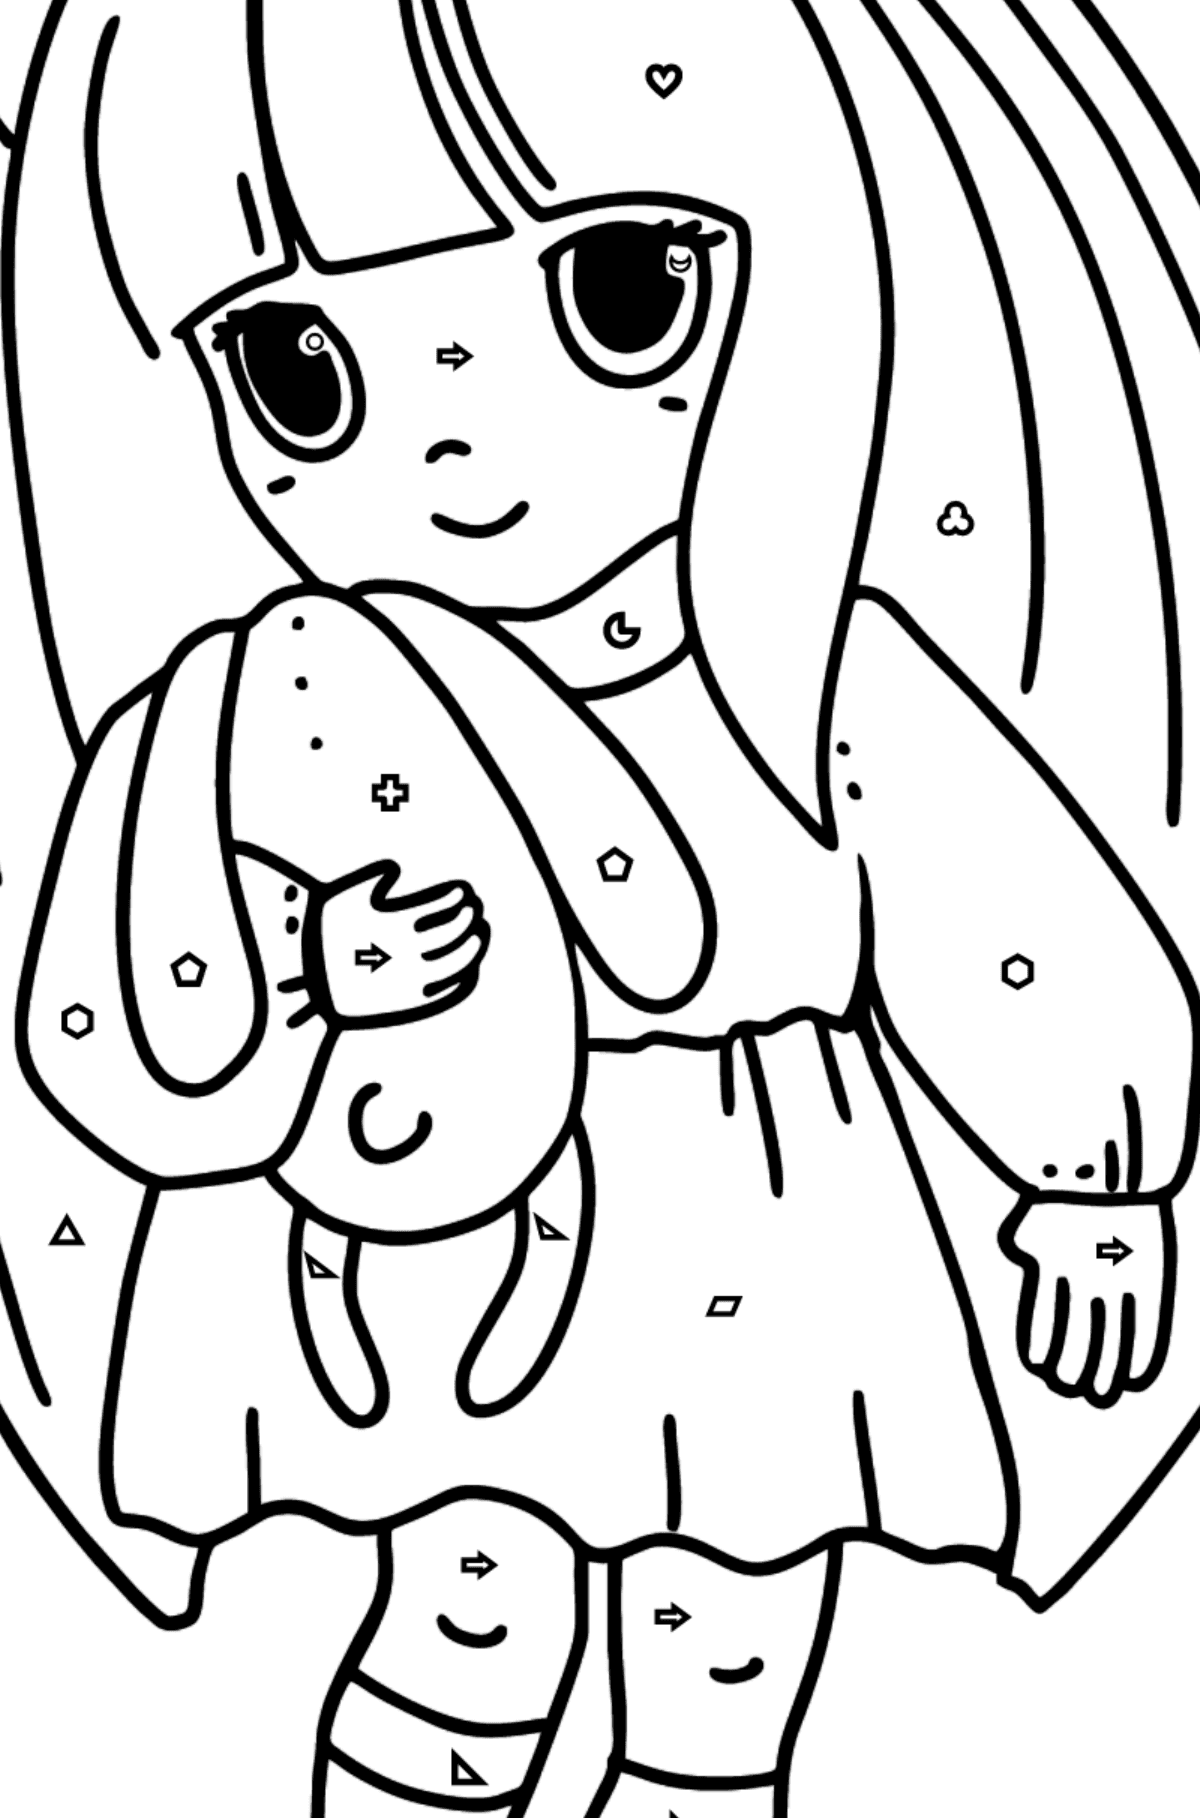 Anime Little Girl Coloring Pages - Coloring by Geometric Shapes for Kids